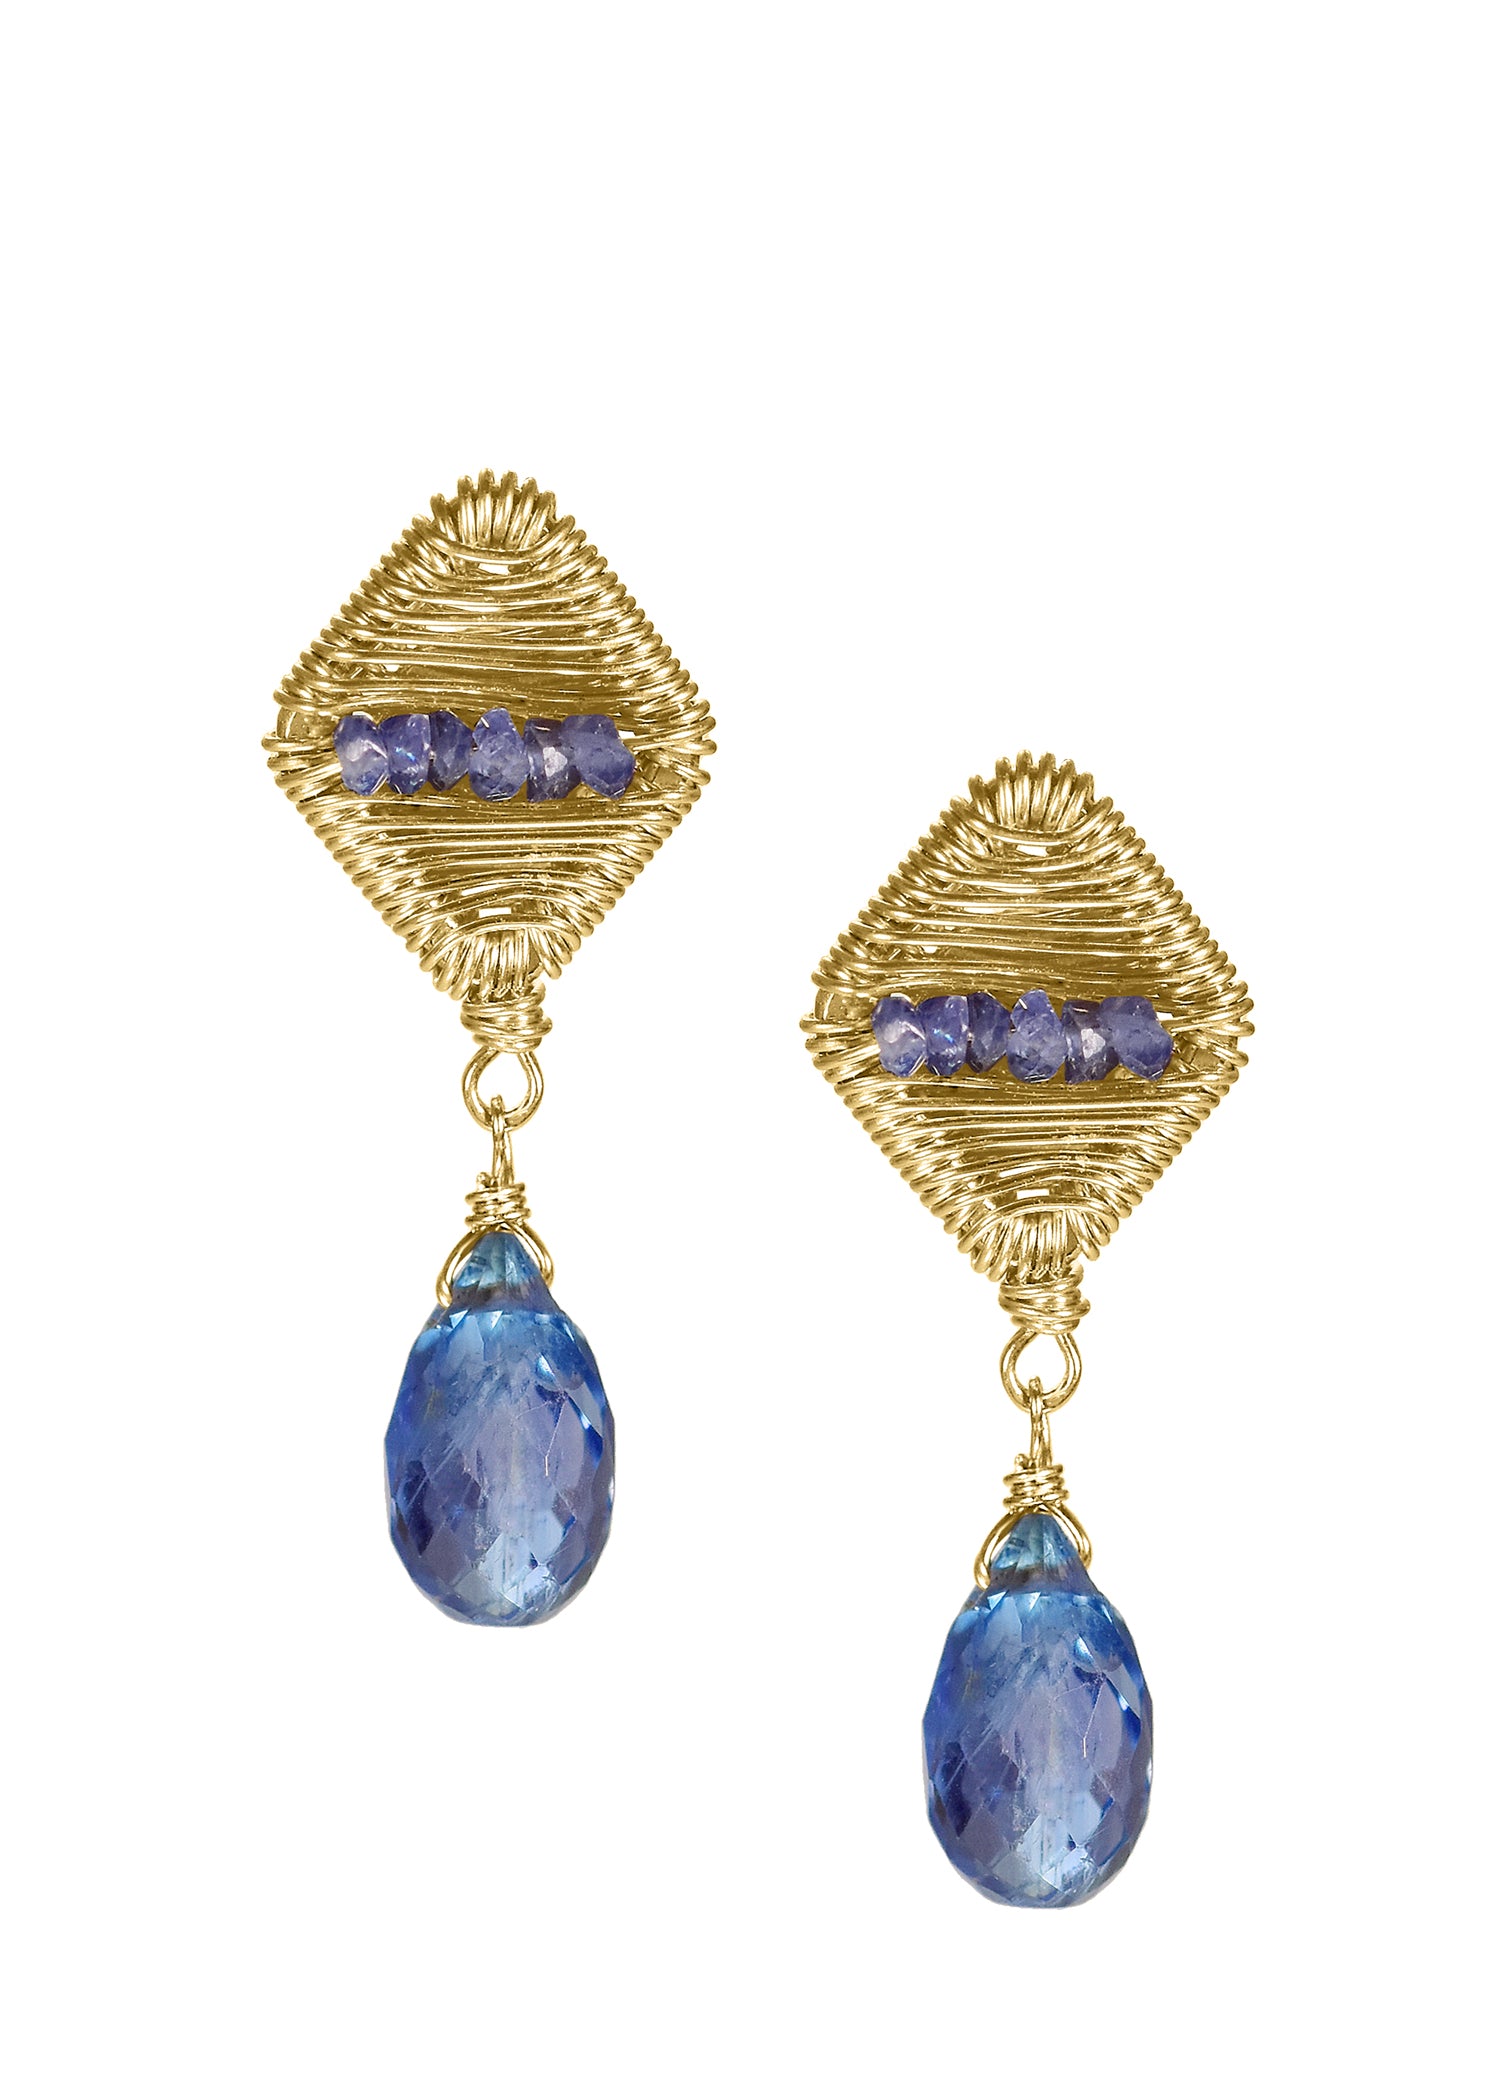 Blues sapphire Kyanite 14k gold fill Earrings measure 7/8" in length and 5/16" in width at the widest point Handmade in our Los Angeles studio